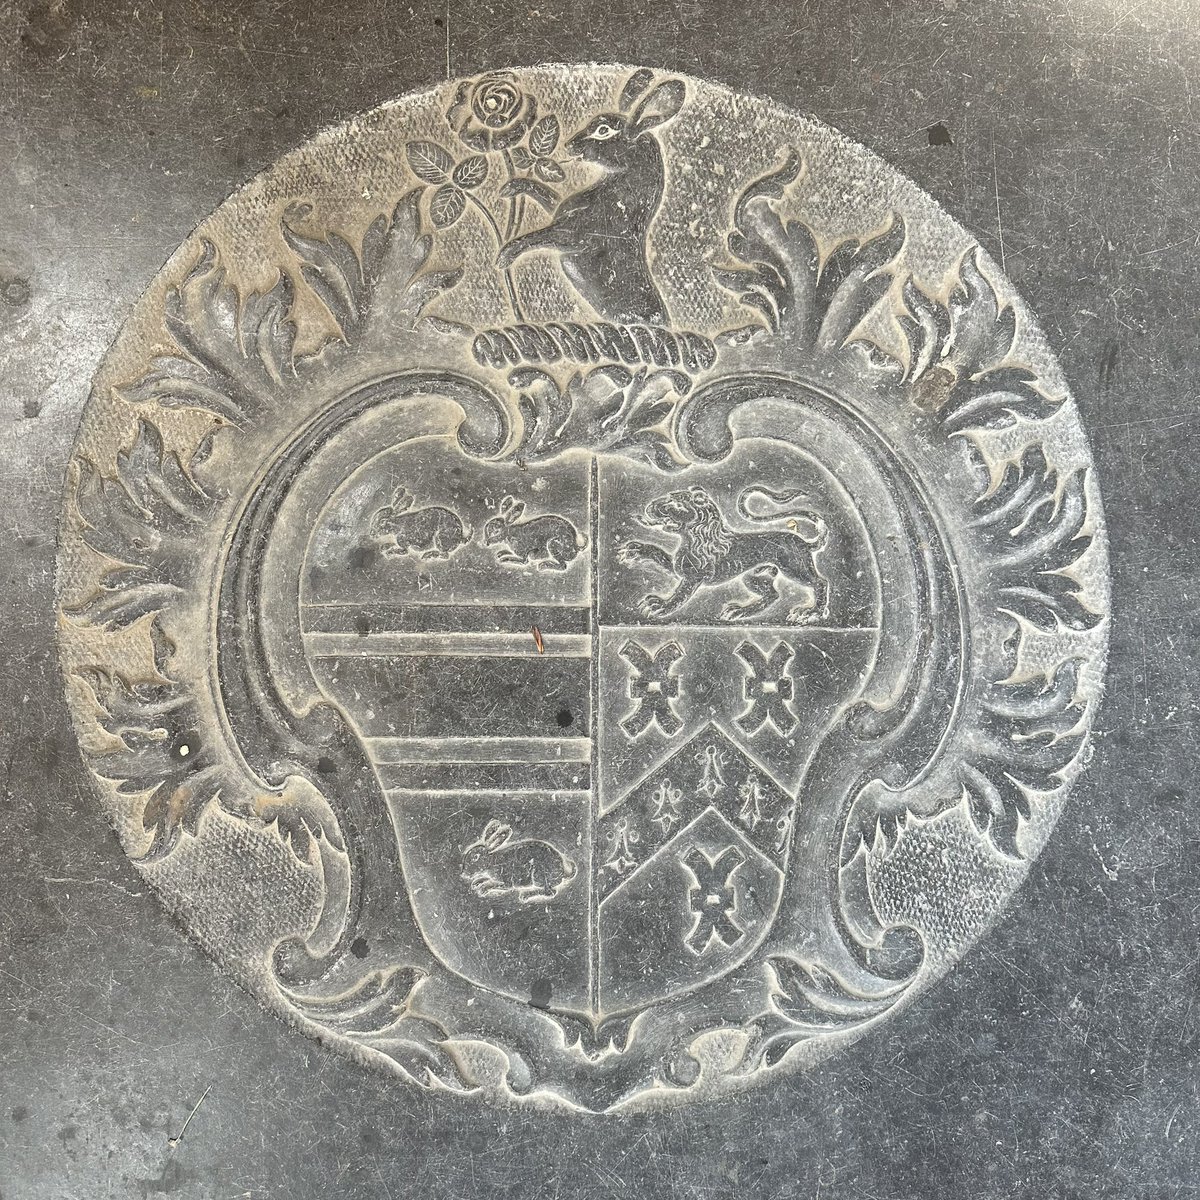 👀 #WalpoleStPeter #Norfolk 

Edwin Cony & his wife, Elizabeth.
Died 1755 & 1745.

Of their 5 sons & 1 daughter, only 2 sons & 1 daughter outlived them.

• Lynn Regis is #KingsLynn
 • Coney old name for rabbit - so hence many rabbits on the Cony Coat of Arms

#MemorialMonday